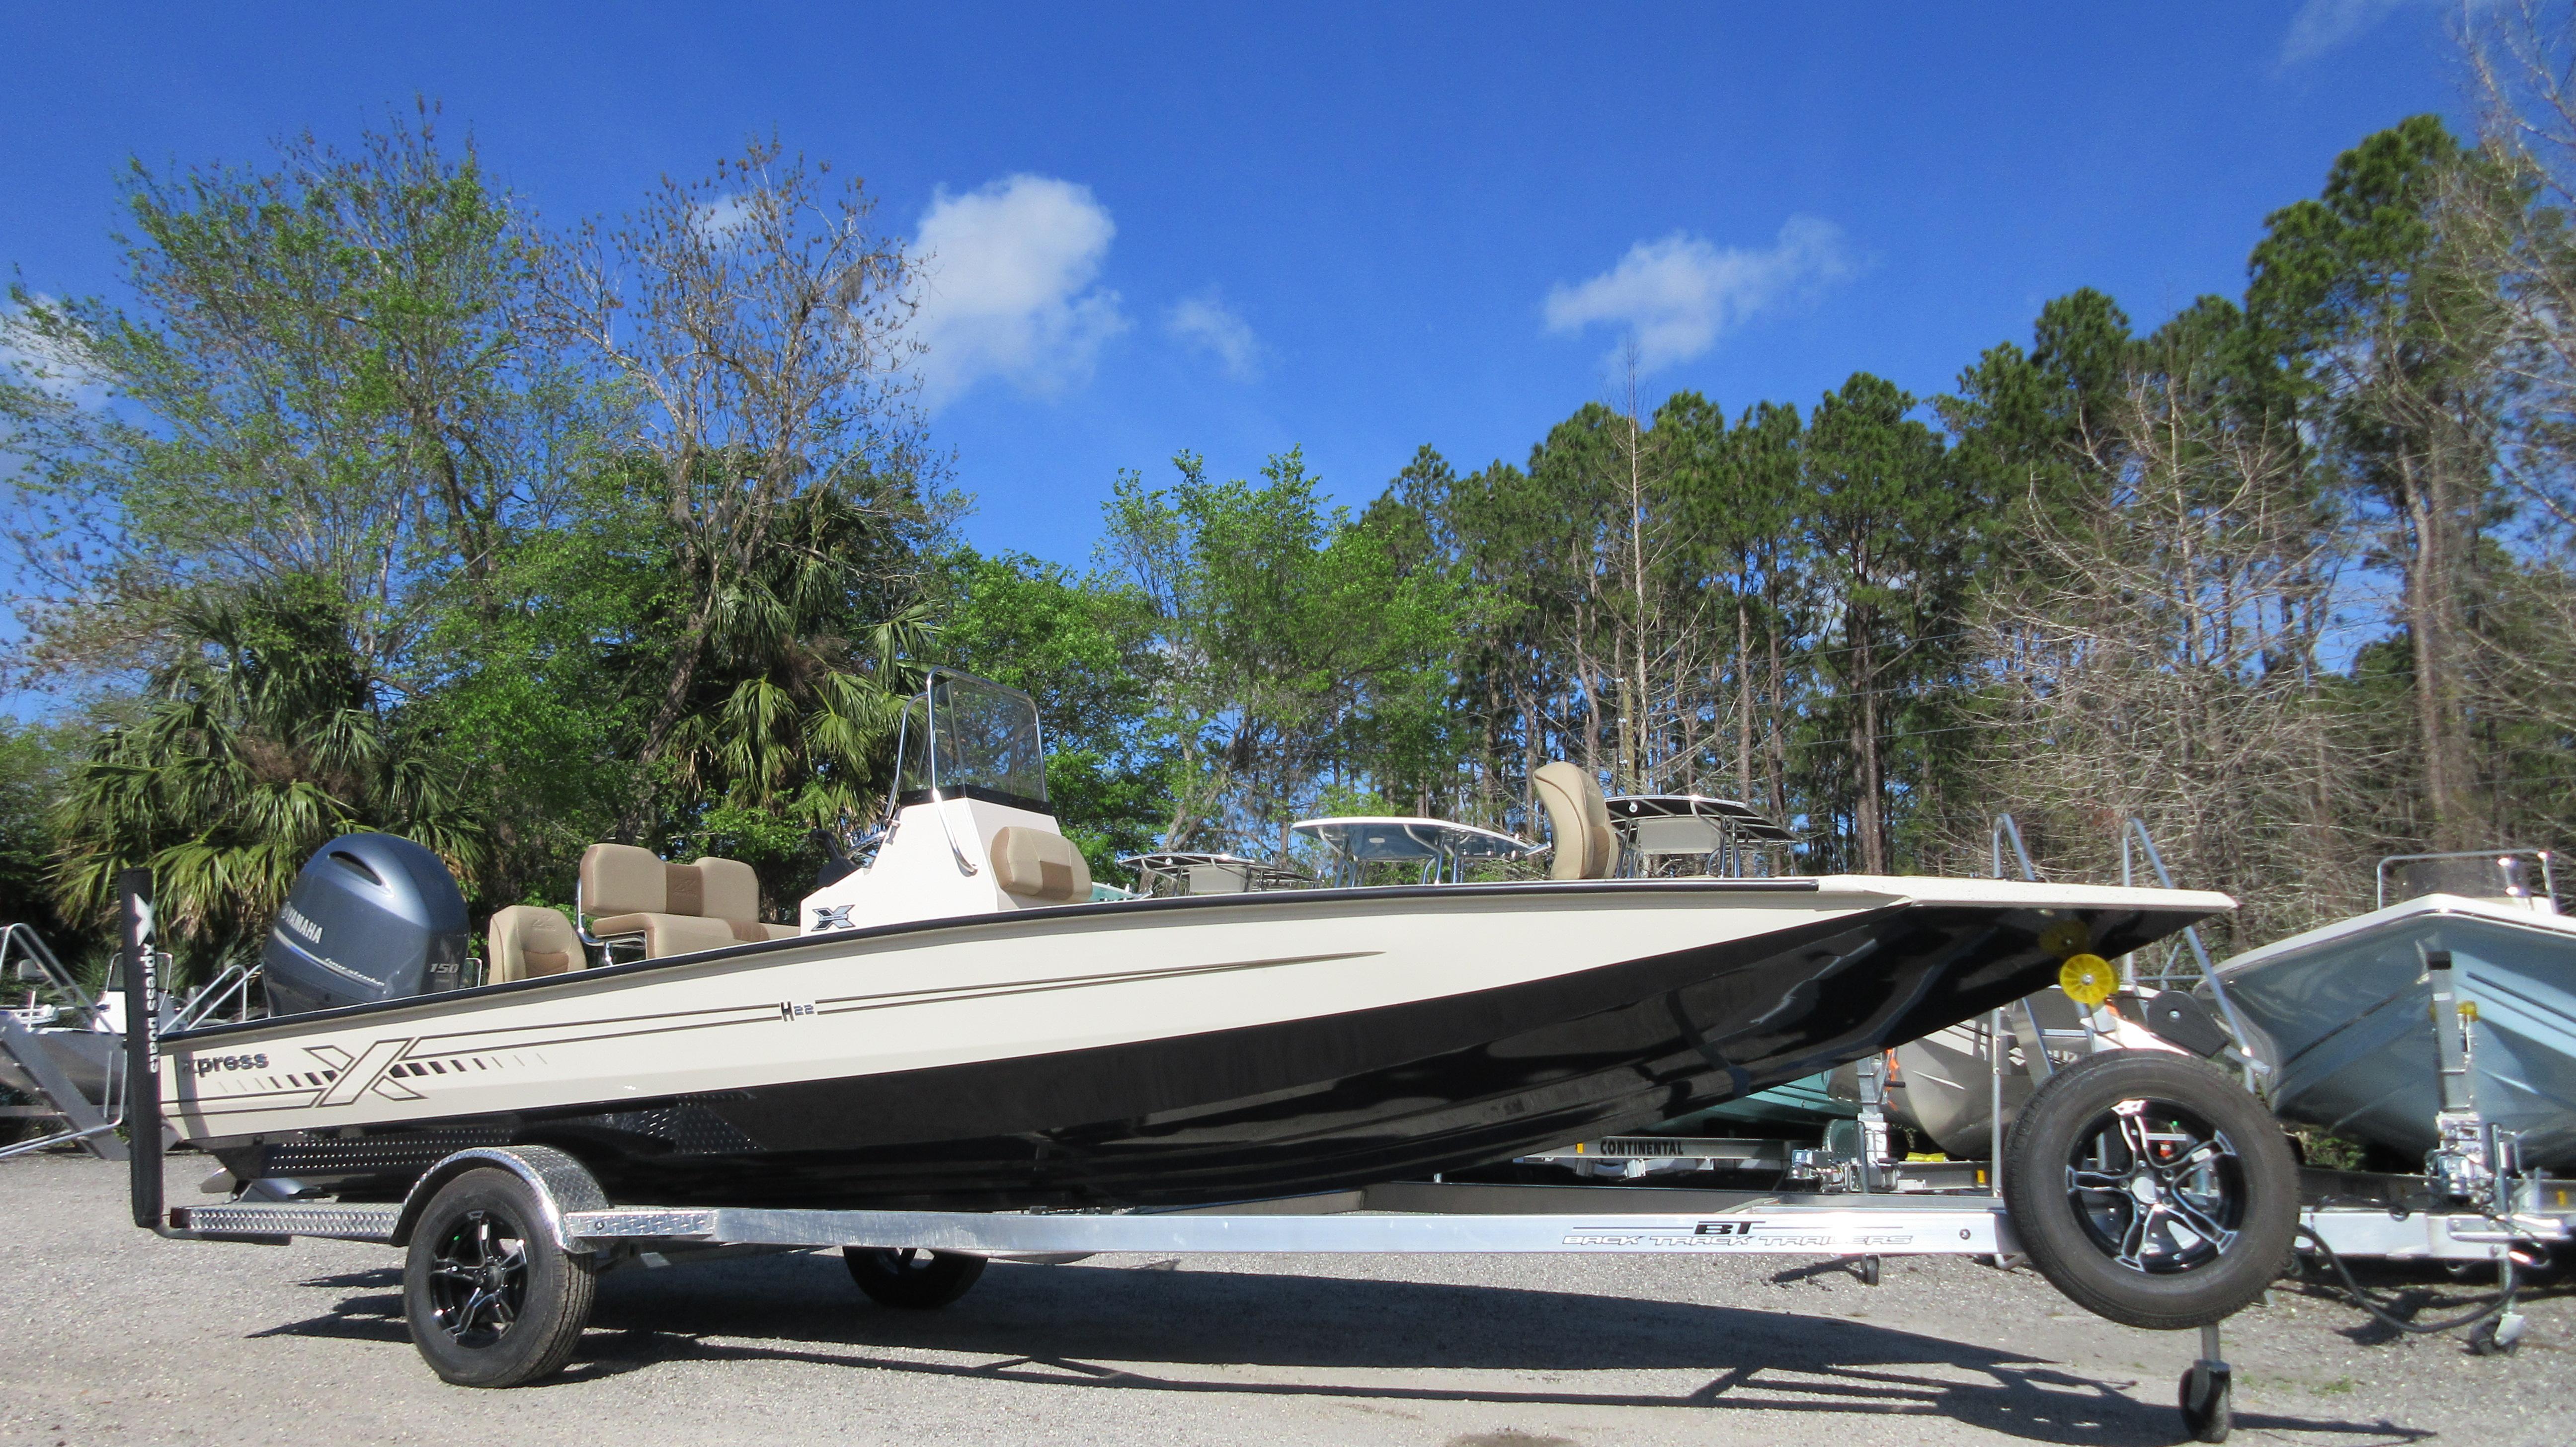 Xpress boats for sale in Florida - Boat Trader